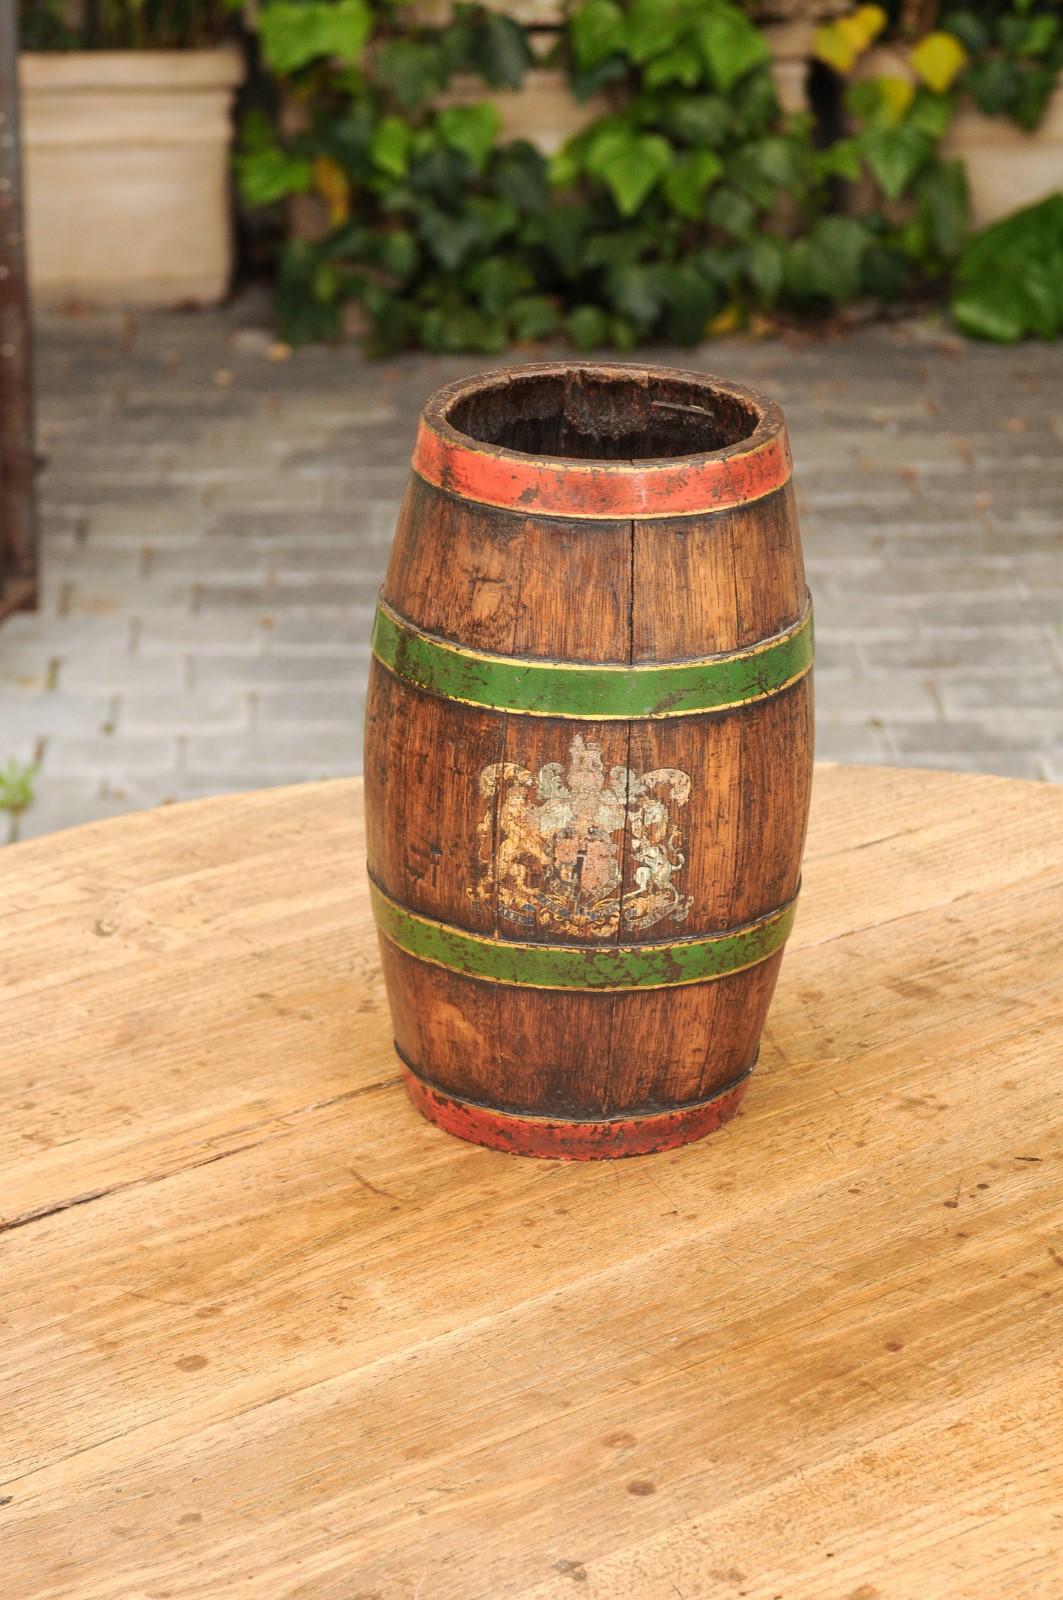 An English Edwardian period small wooden barrel from the early 20th century, with green painted accents and United Kingdom coat or arms. Born in England during the early years of the 20th century, this charming rustic wooden barrel features a